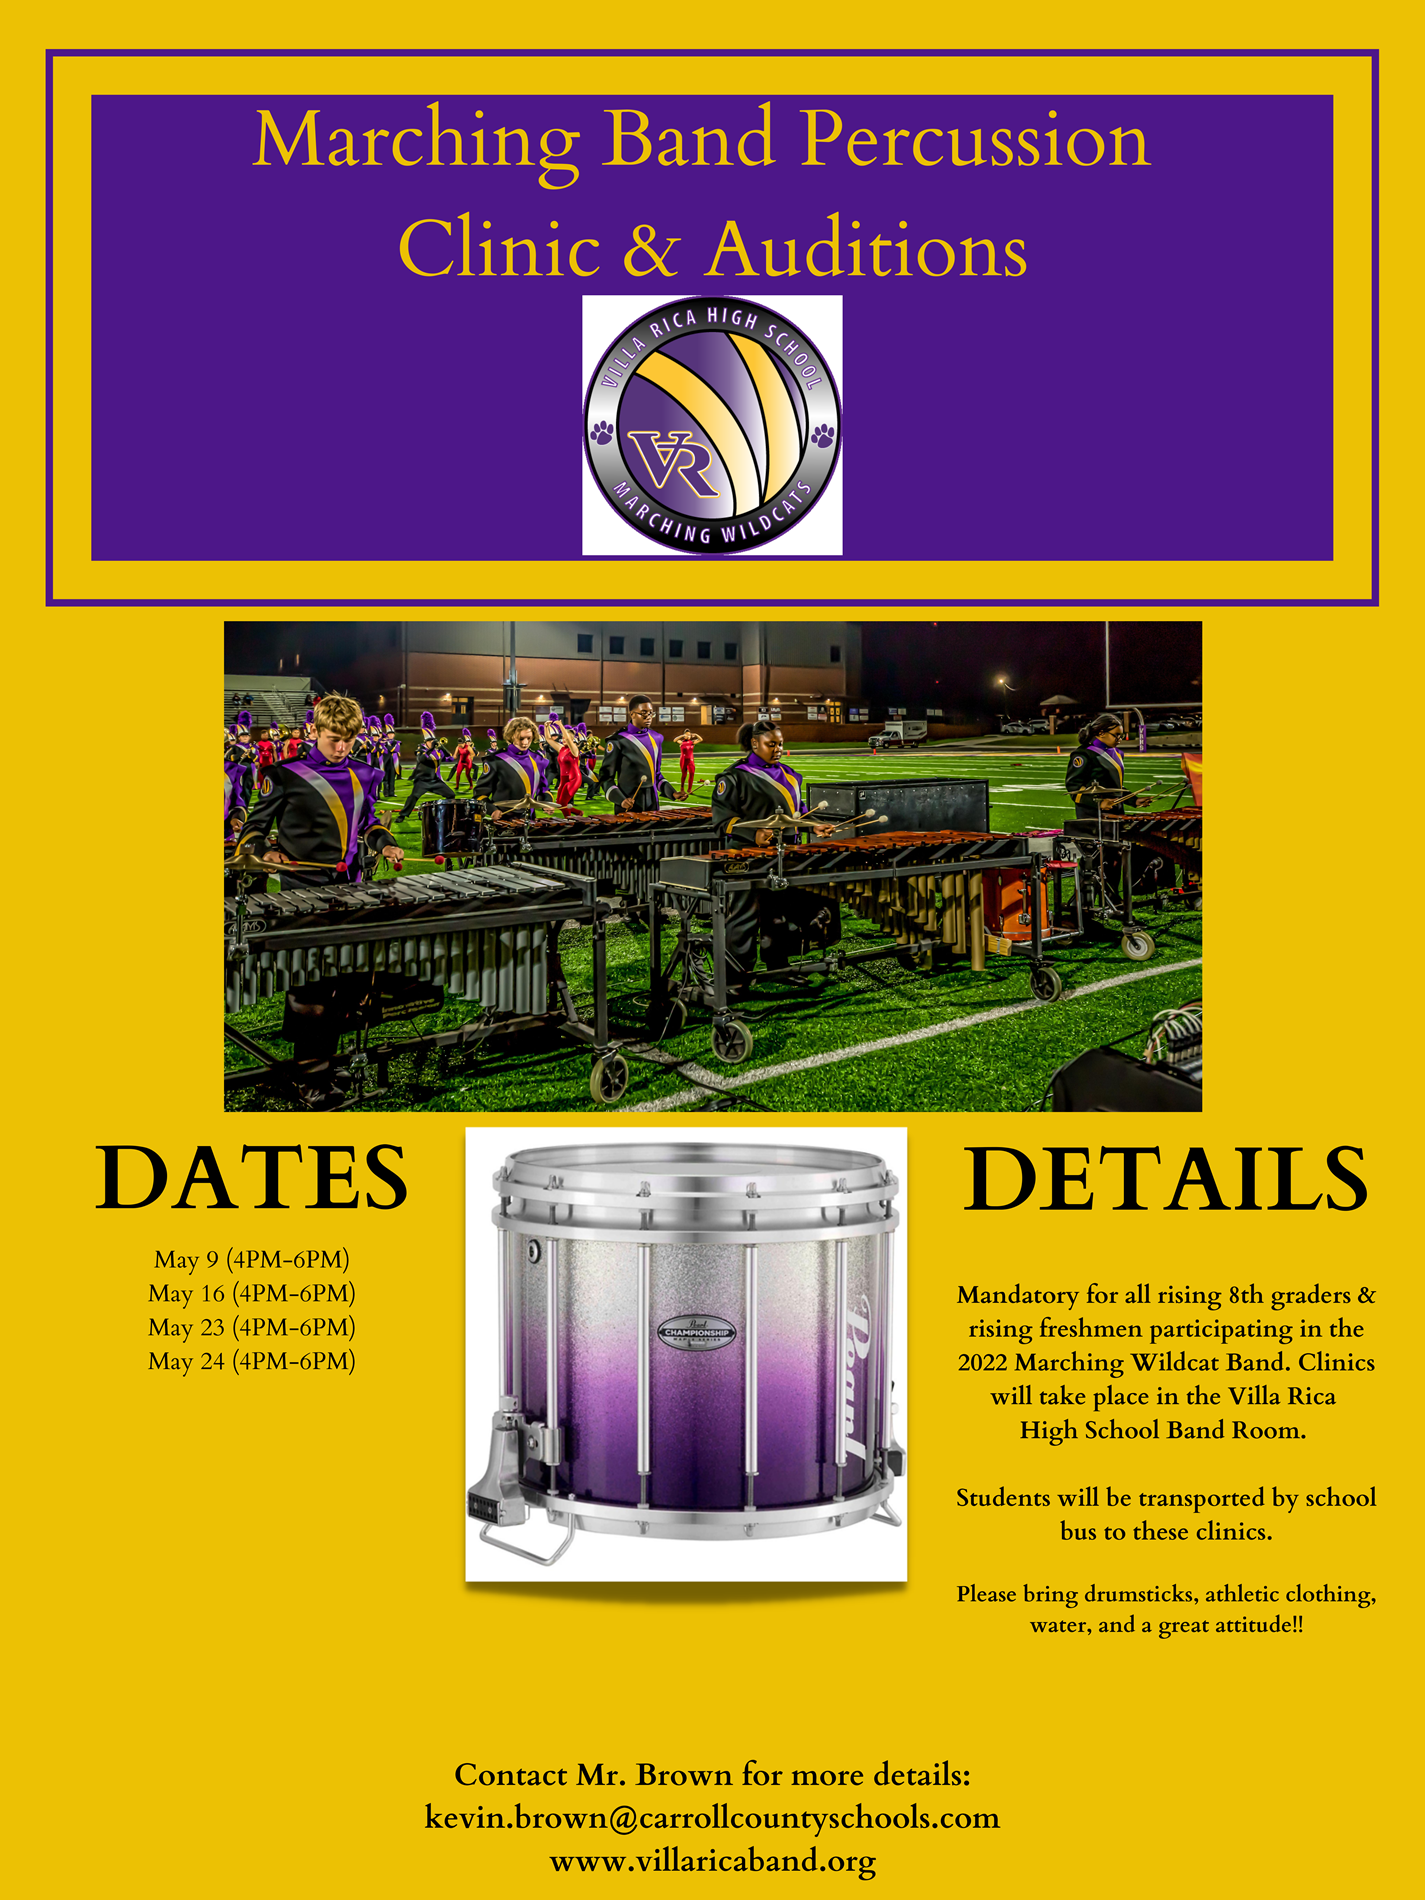 VRHS Percussion Audition Clinic